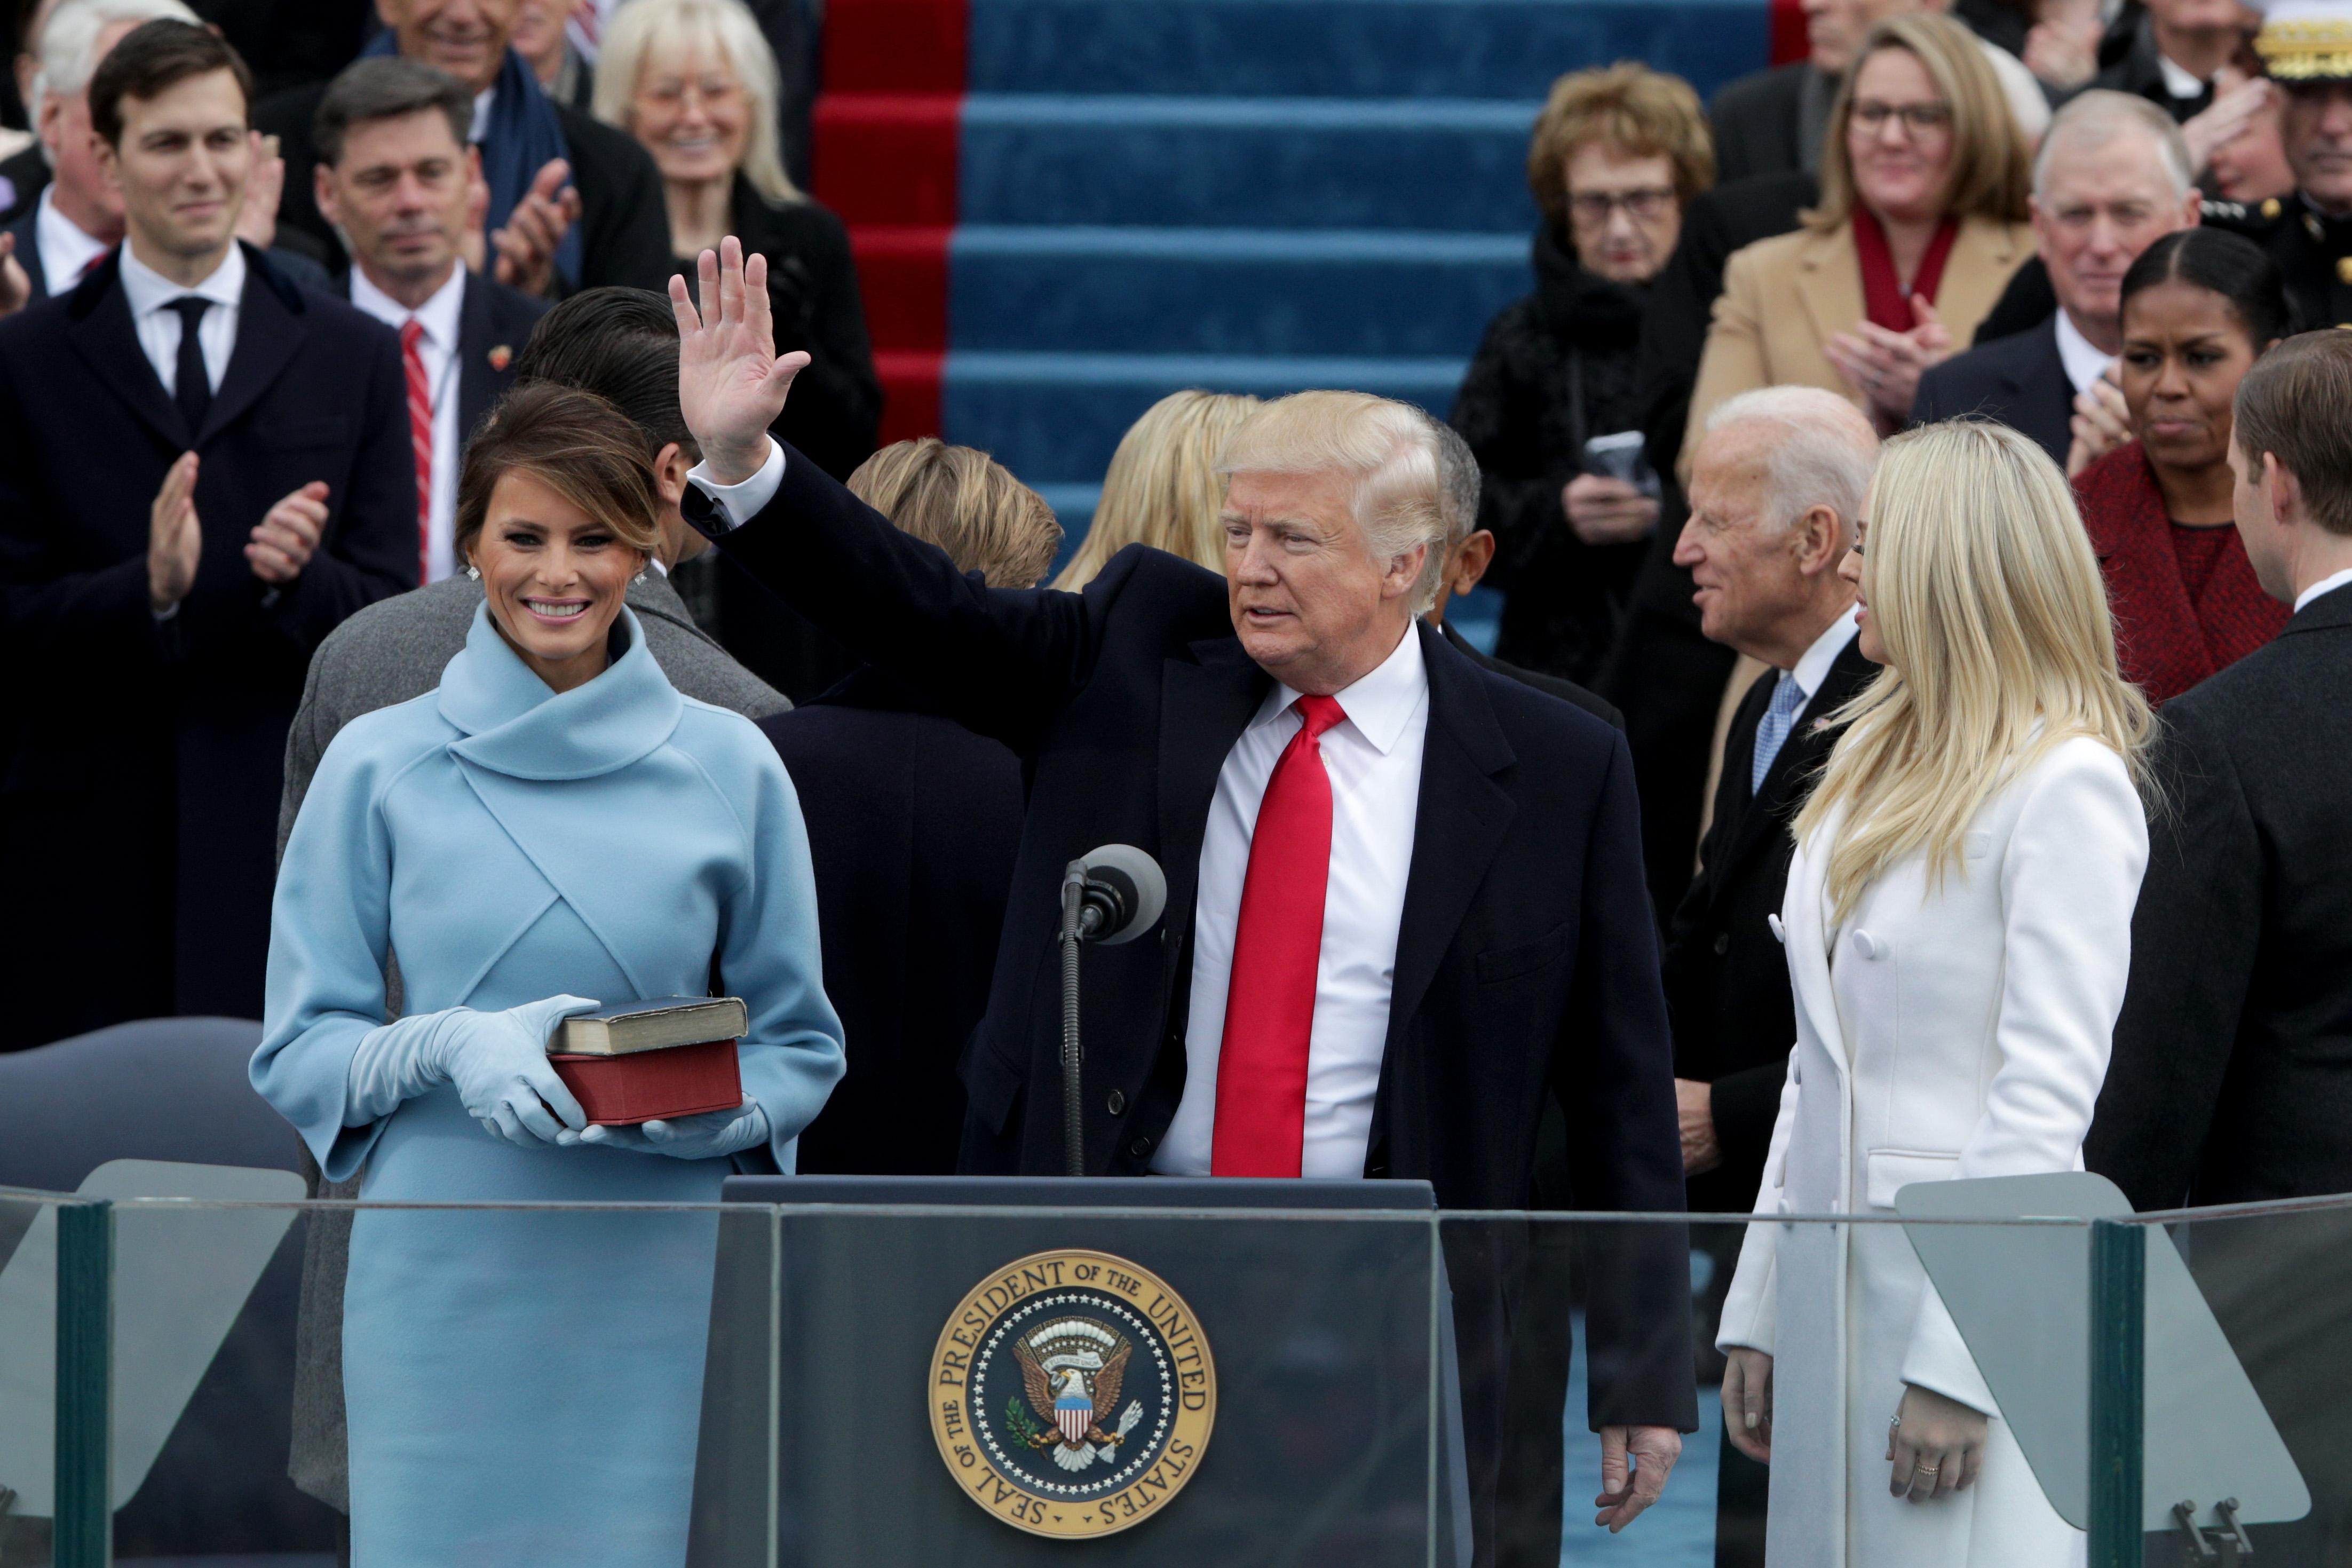 Trump waves at his inauguration. Melania stands next to him, holding books. On the other side, his daughter Tiffany looks around.